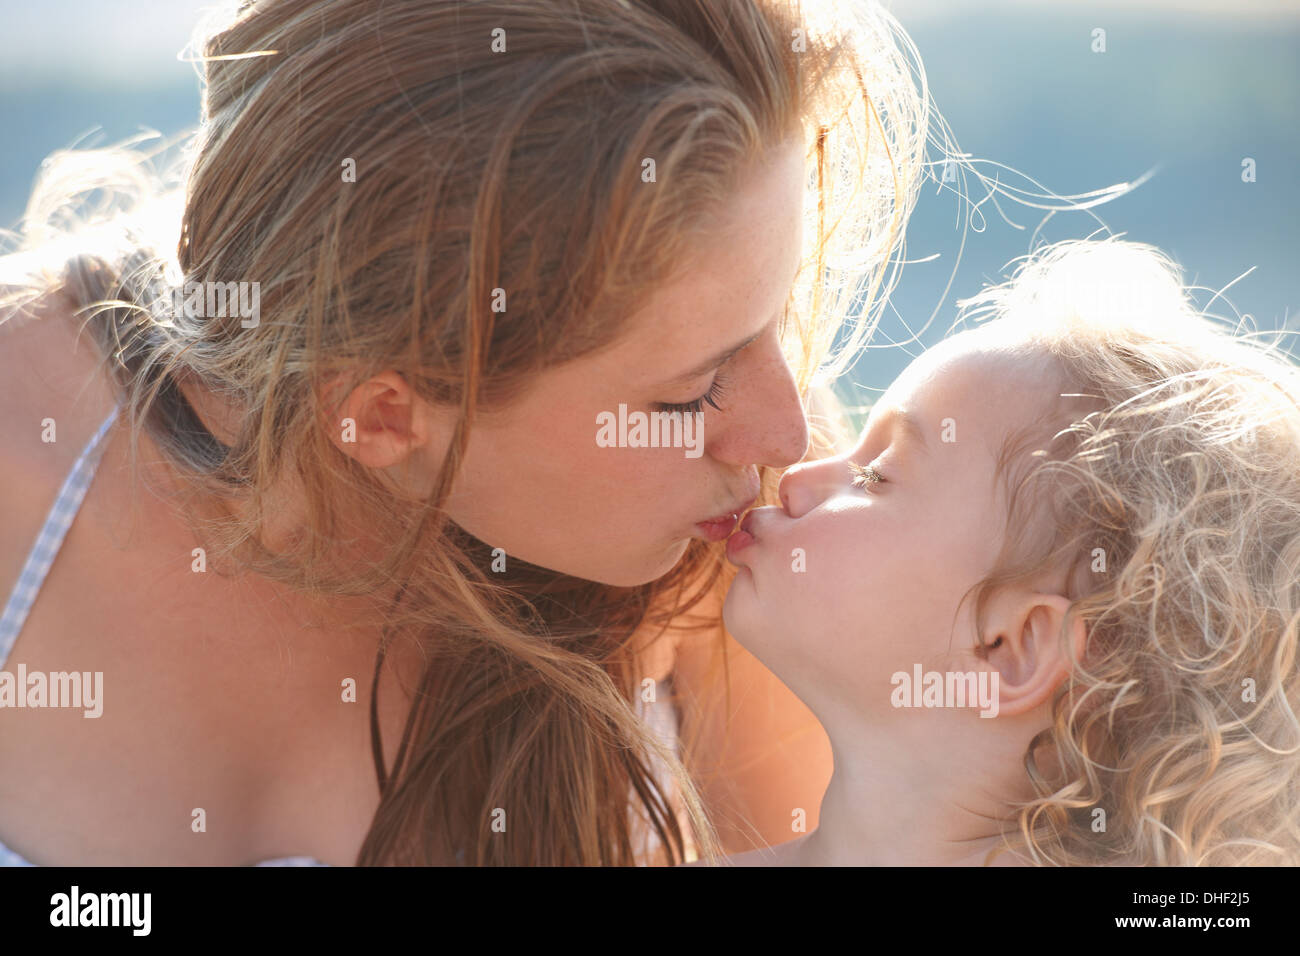 Portrait of young girl kissing older sister Stock Photo